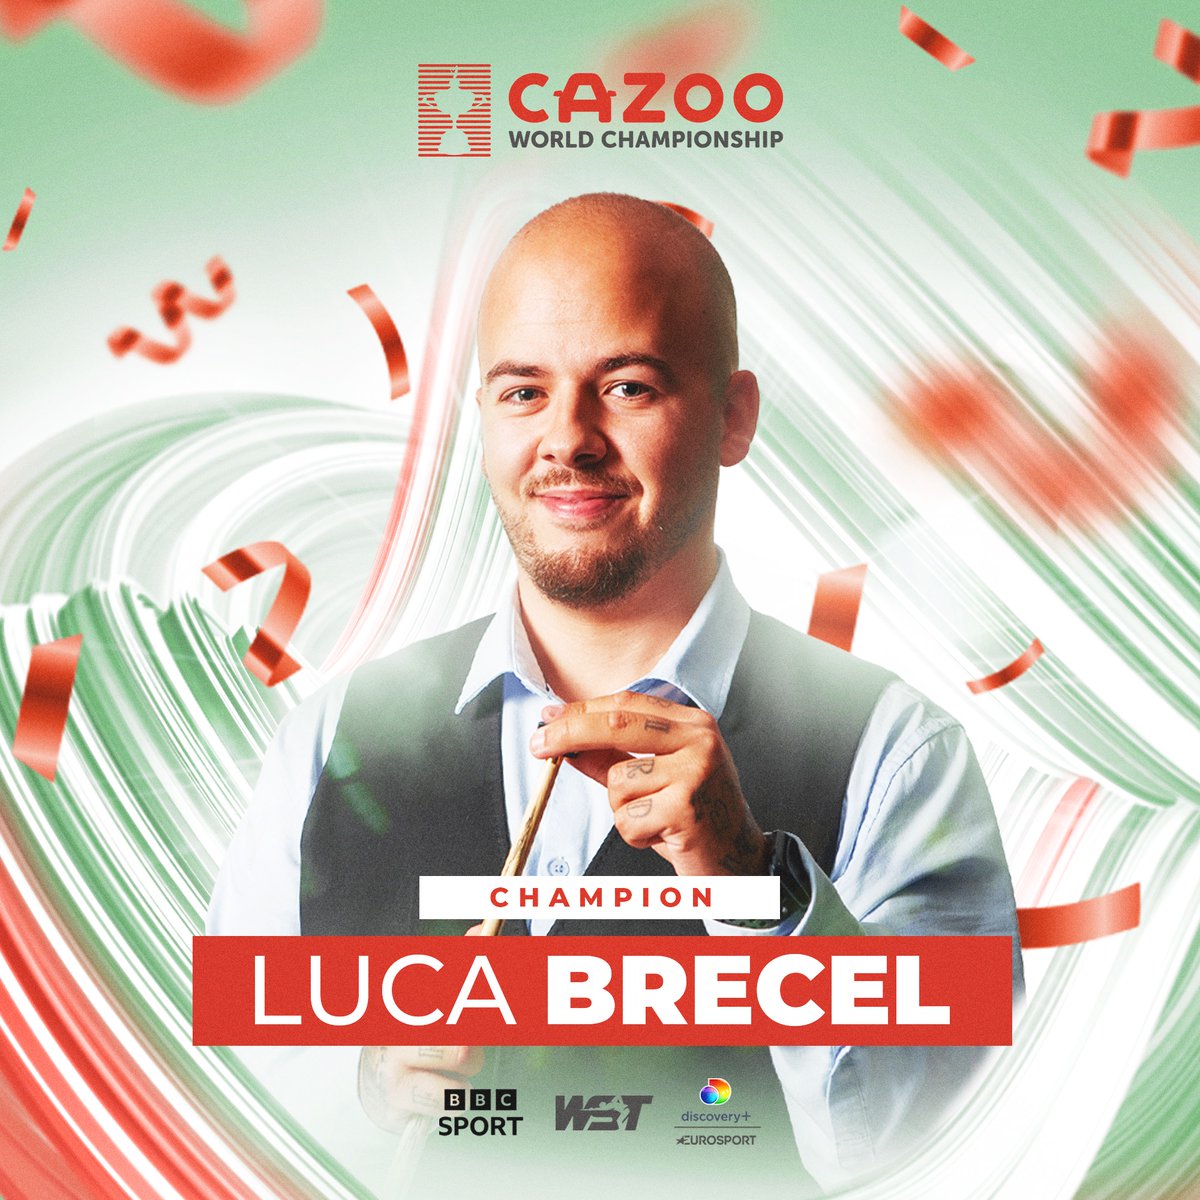 LUCA BRECEL IS SNOOKER CHAMPION OF THE WORLD!! 🌍🏆

#CazooWorldChampionship | @CazooUK